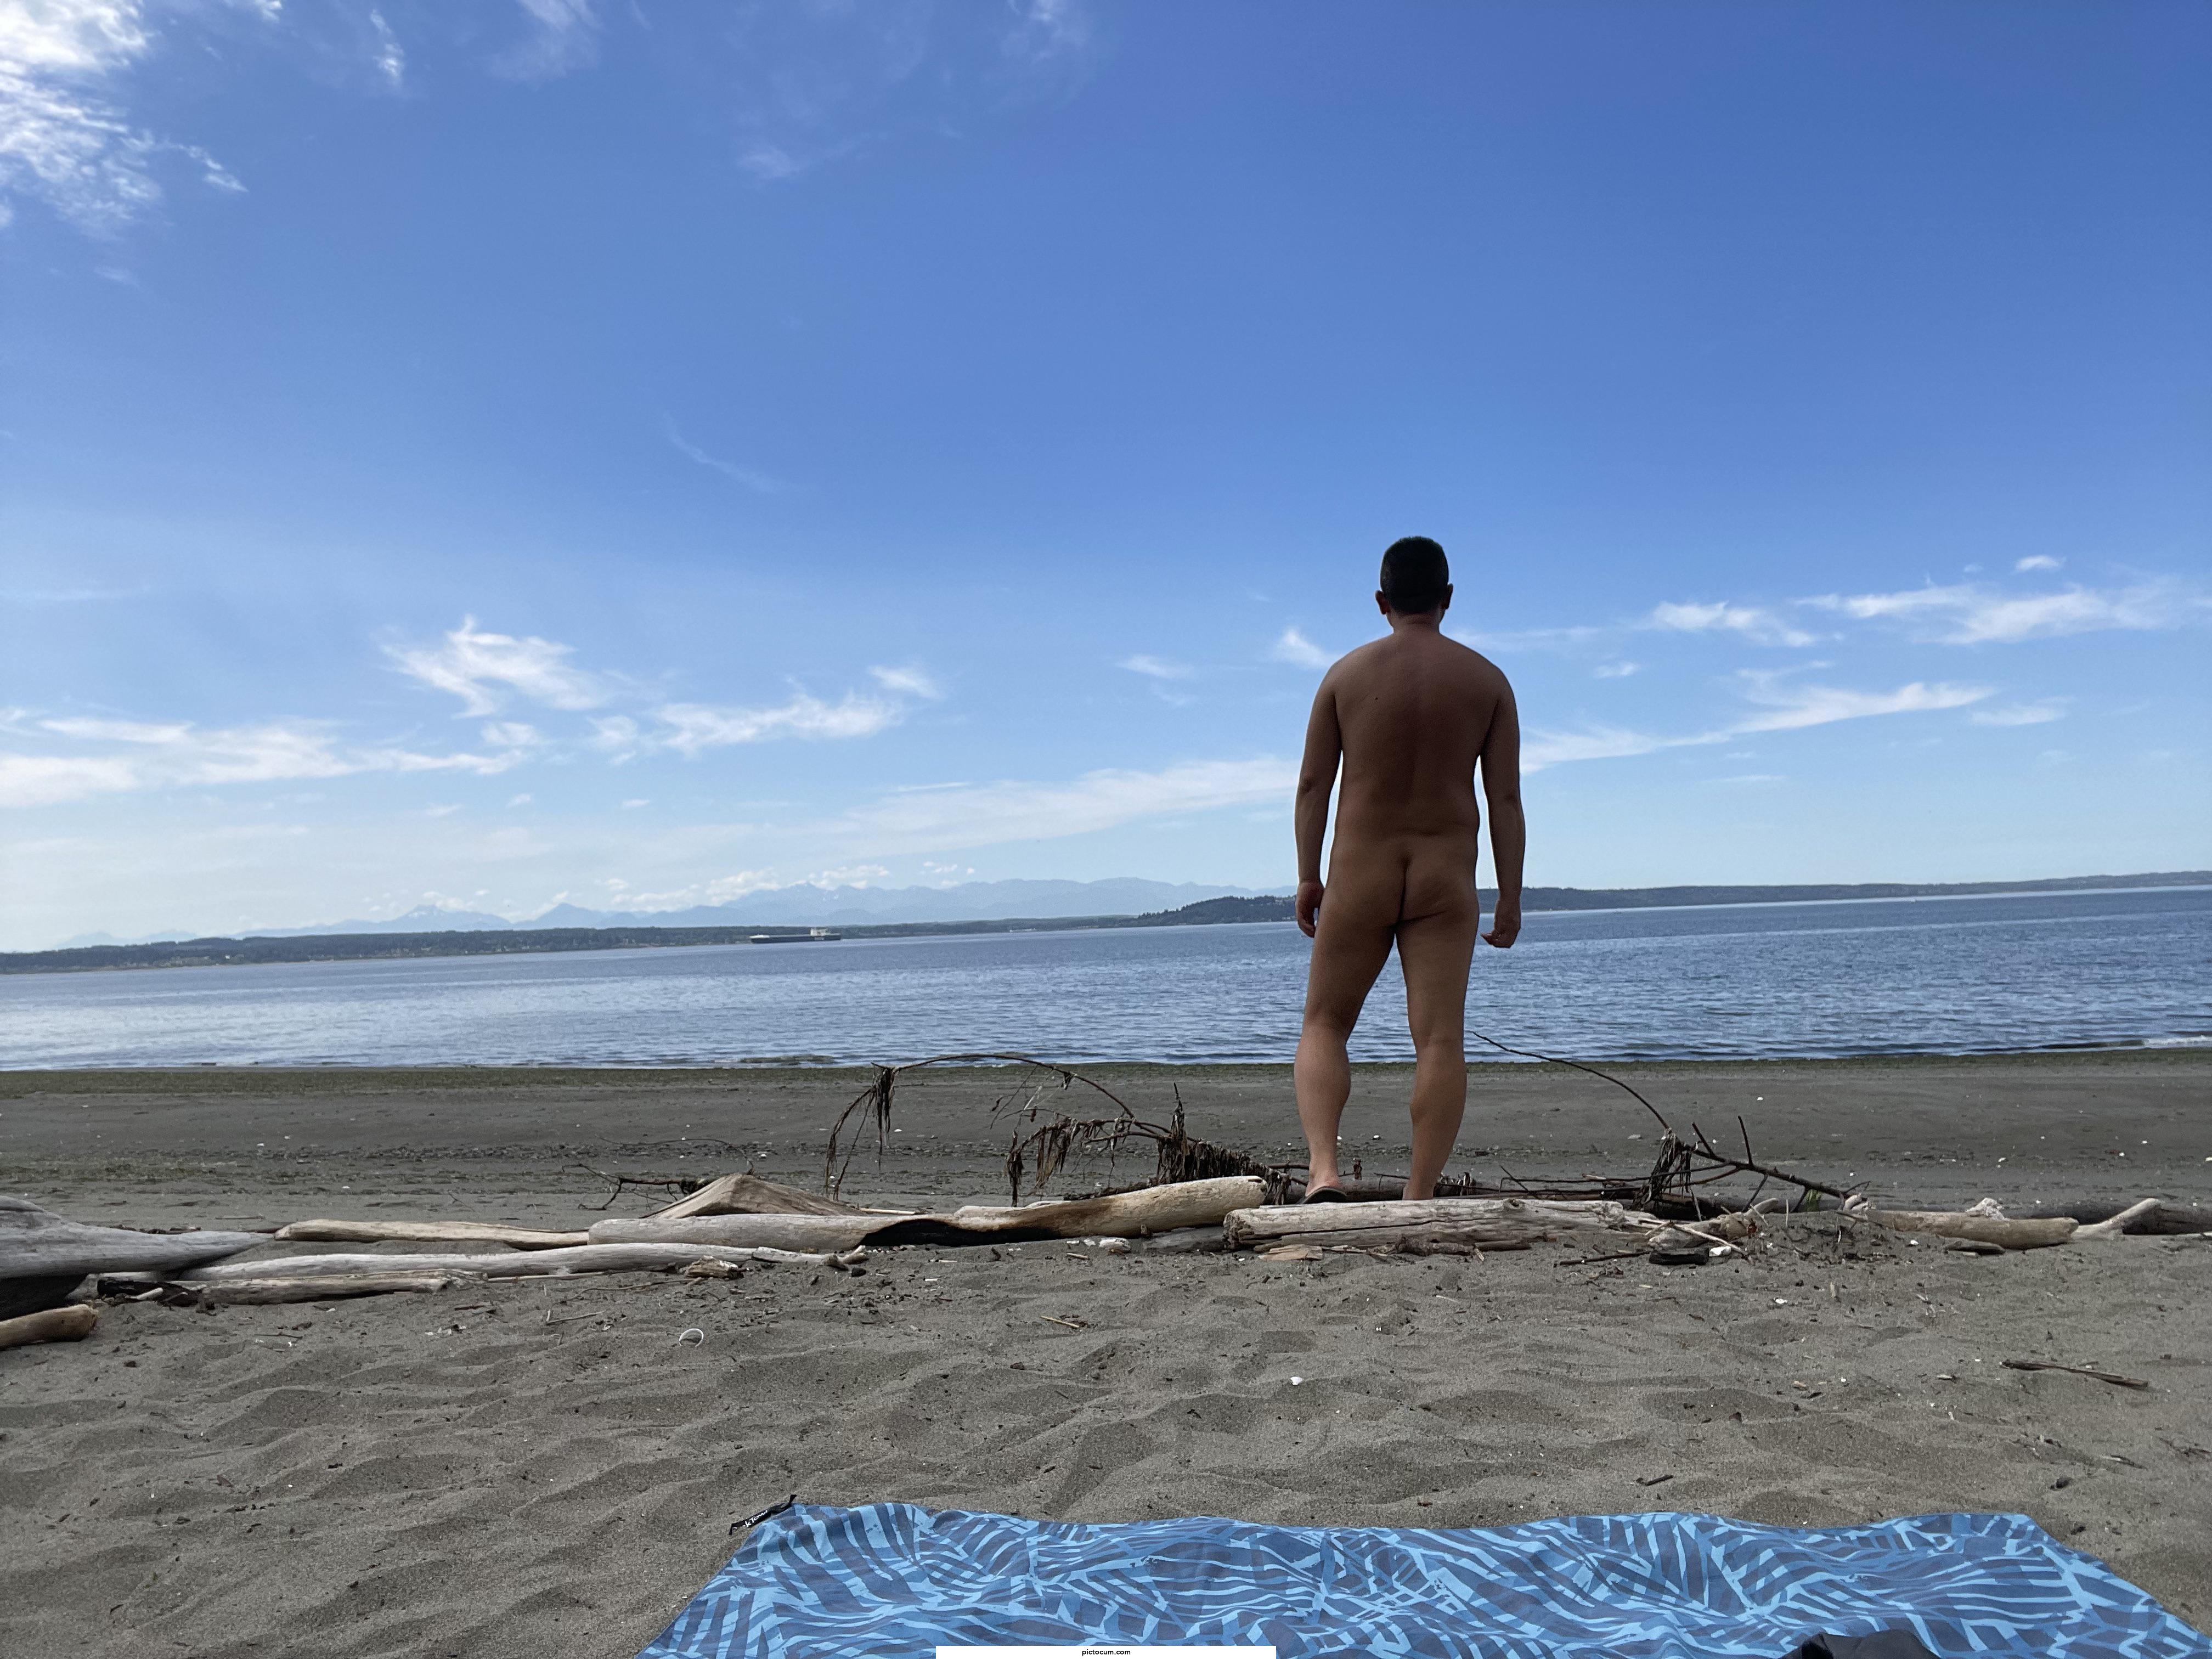 I went to the nude beach.